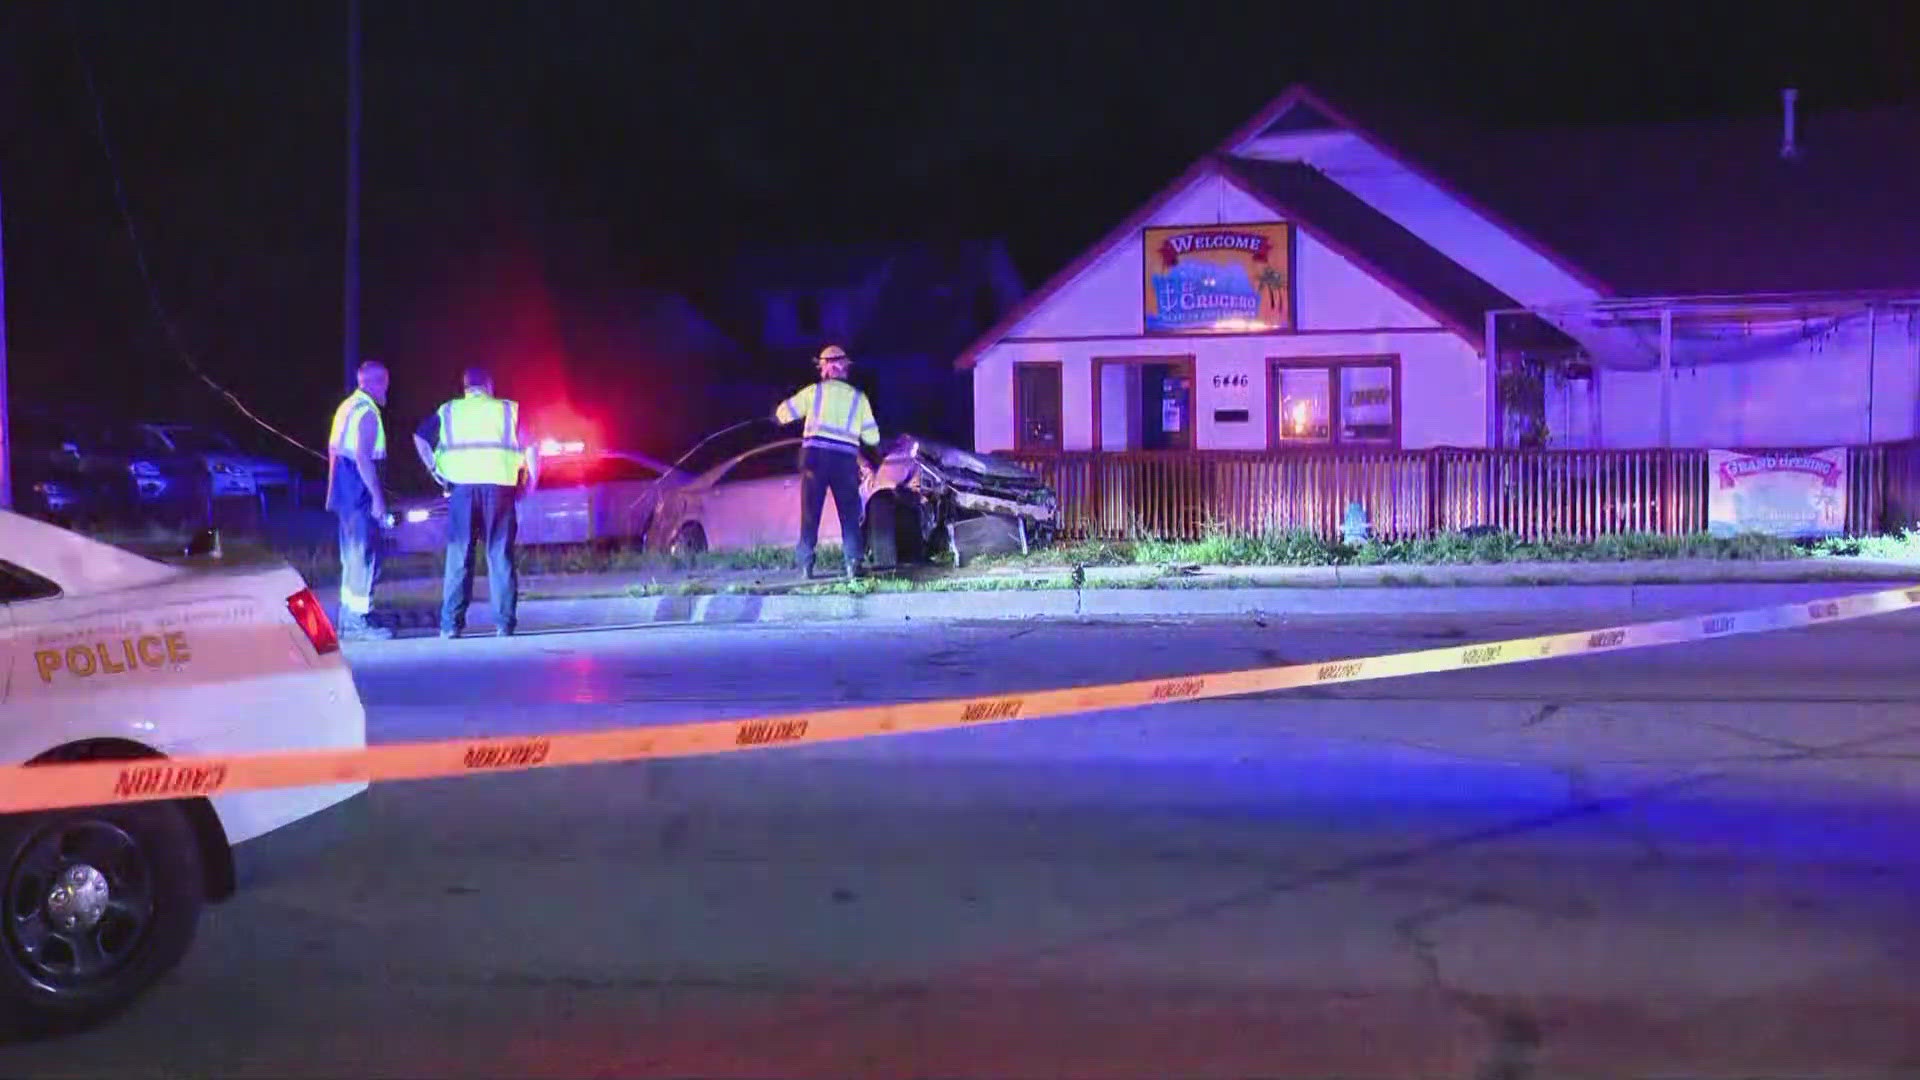 The crash was reported around 3:45 a.m. Tuesday along West Washington Street just west of South High School Road.